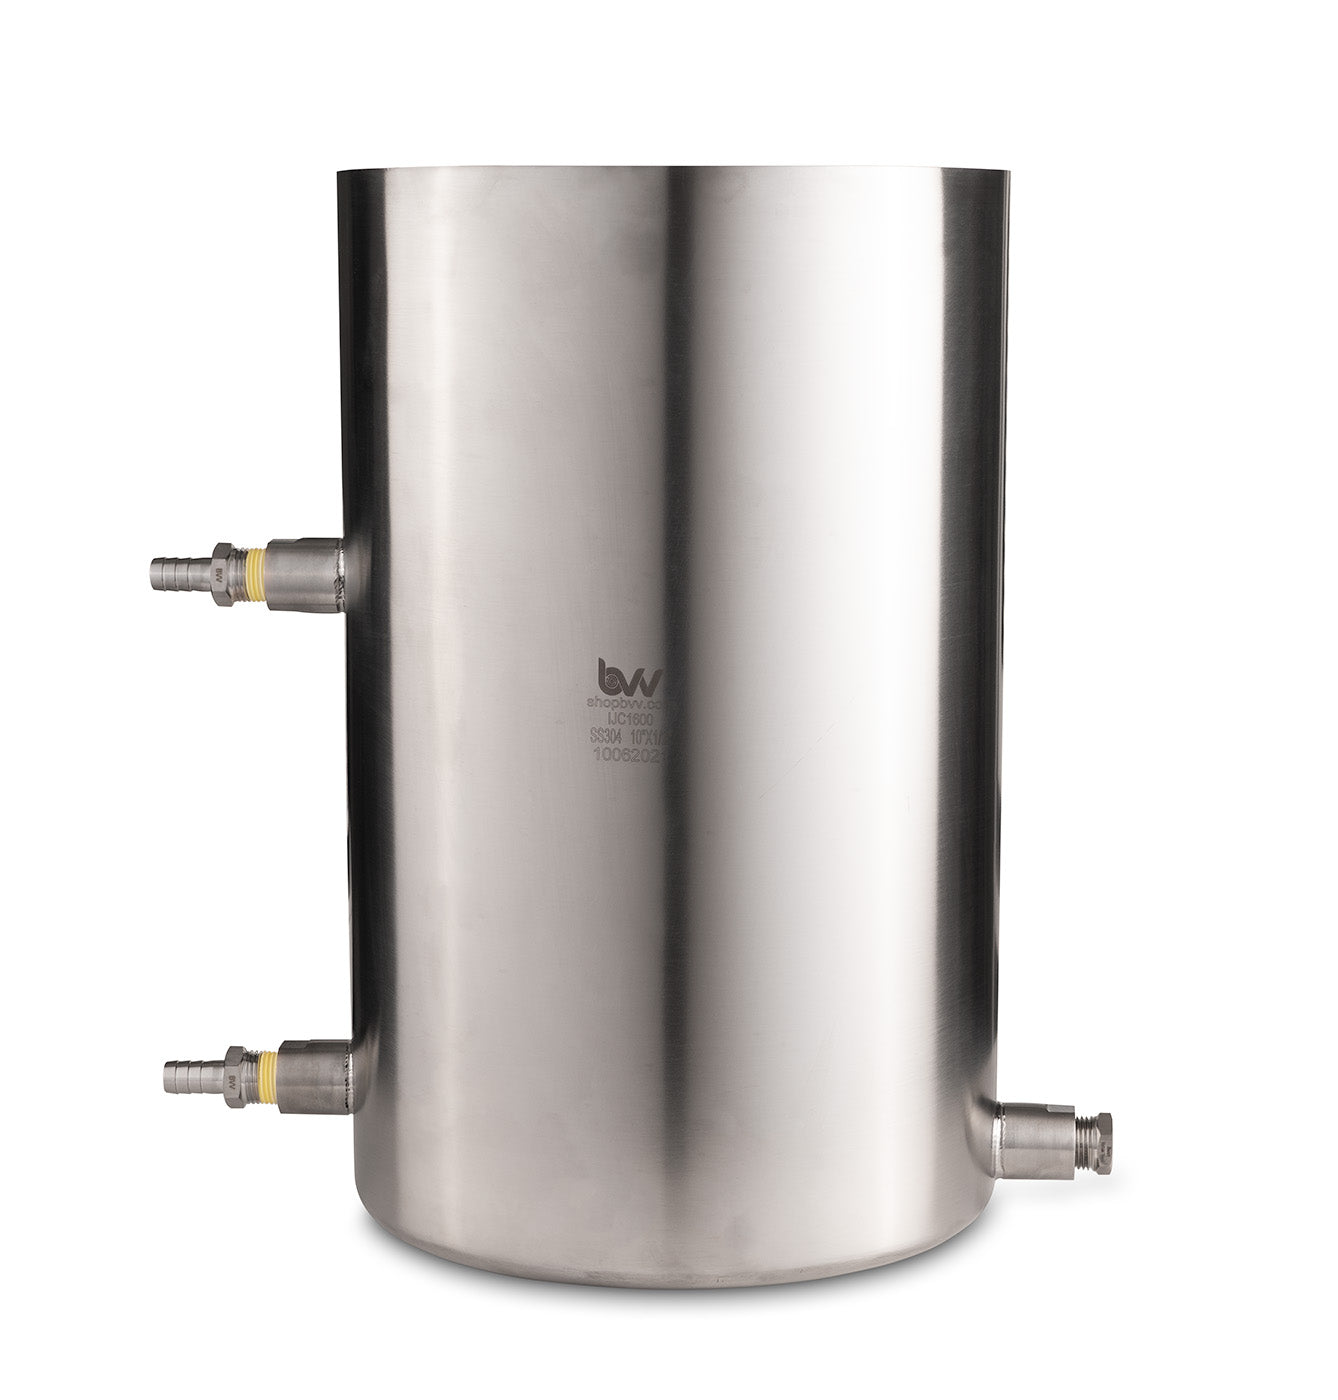 BVV Stainless Steel Injection Coil - Tall